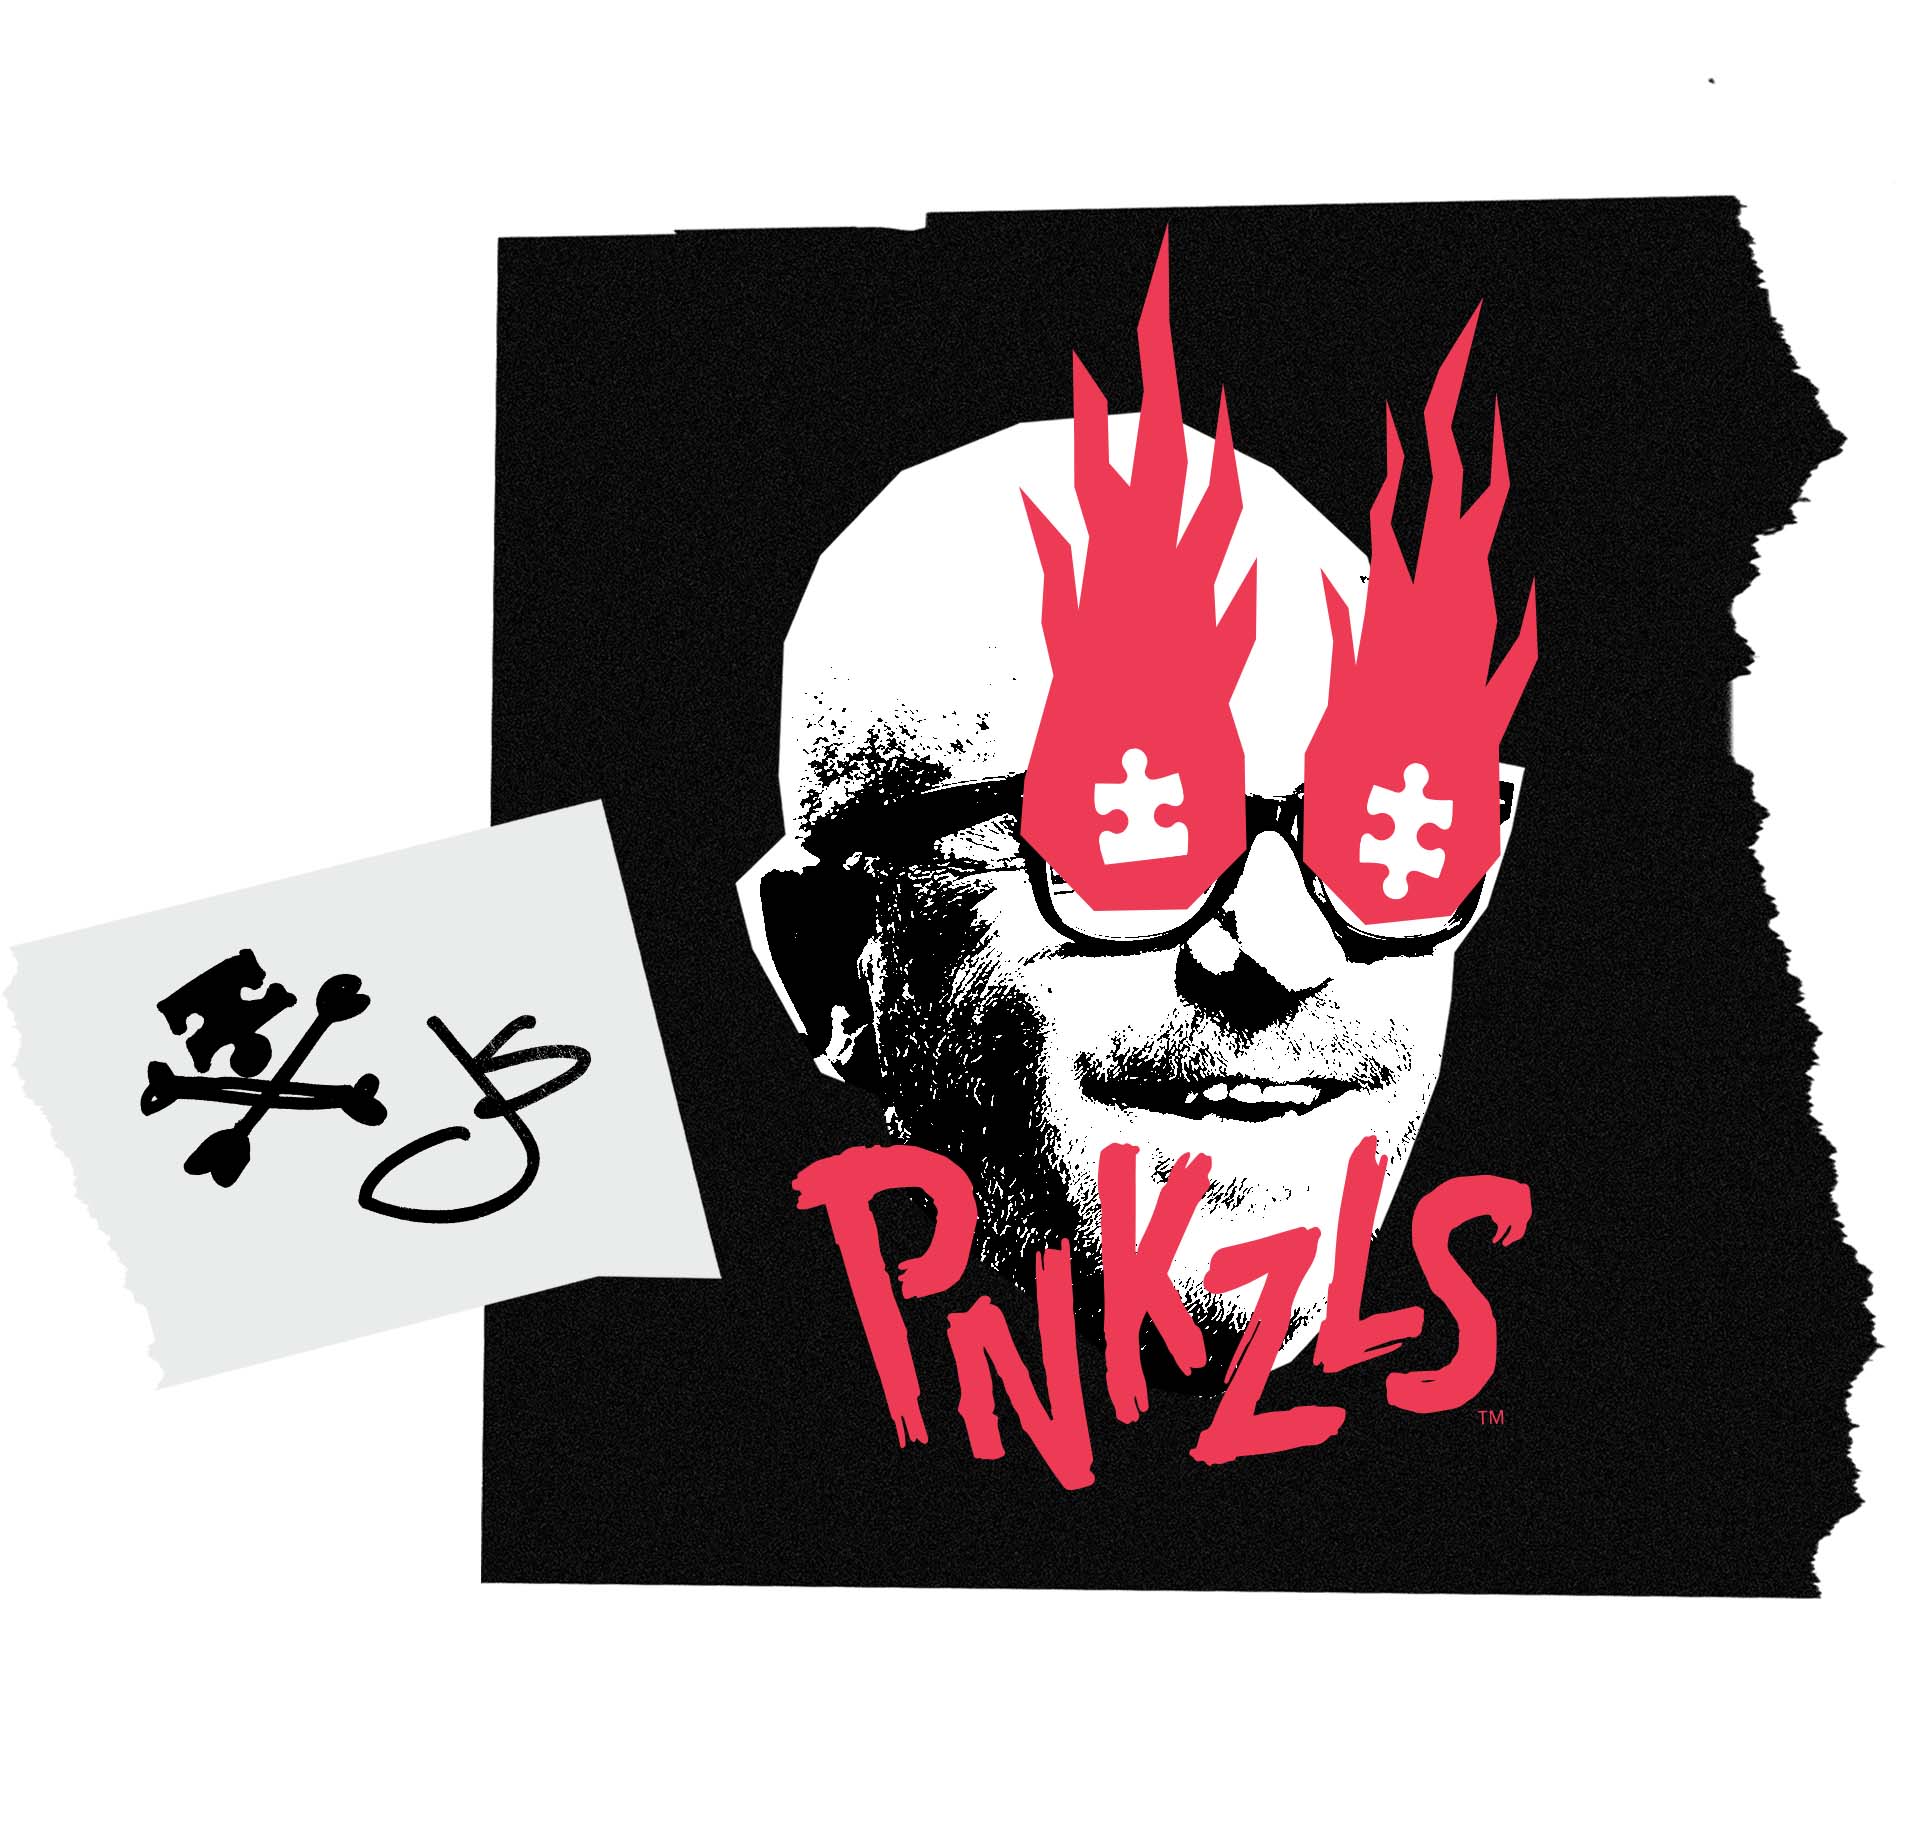 Illustration of Jeremy Schwartz with flames and puzzle pieces for eyes